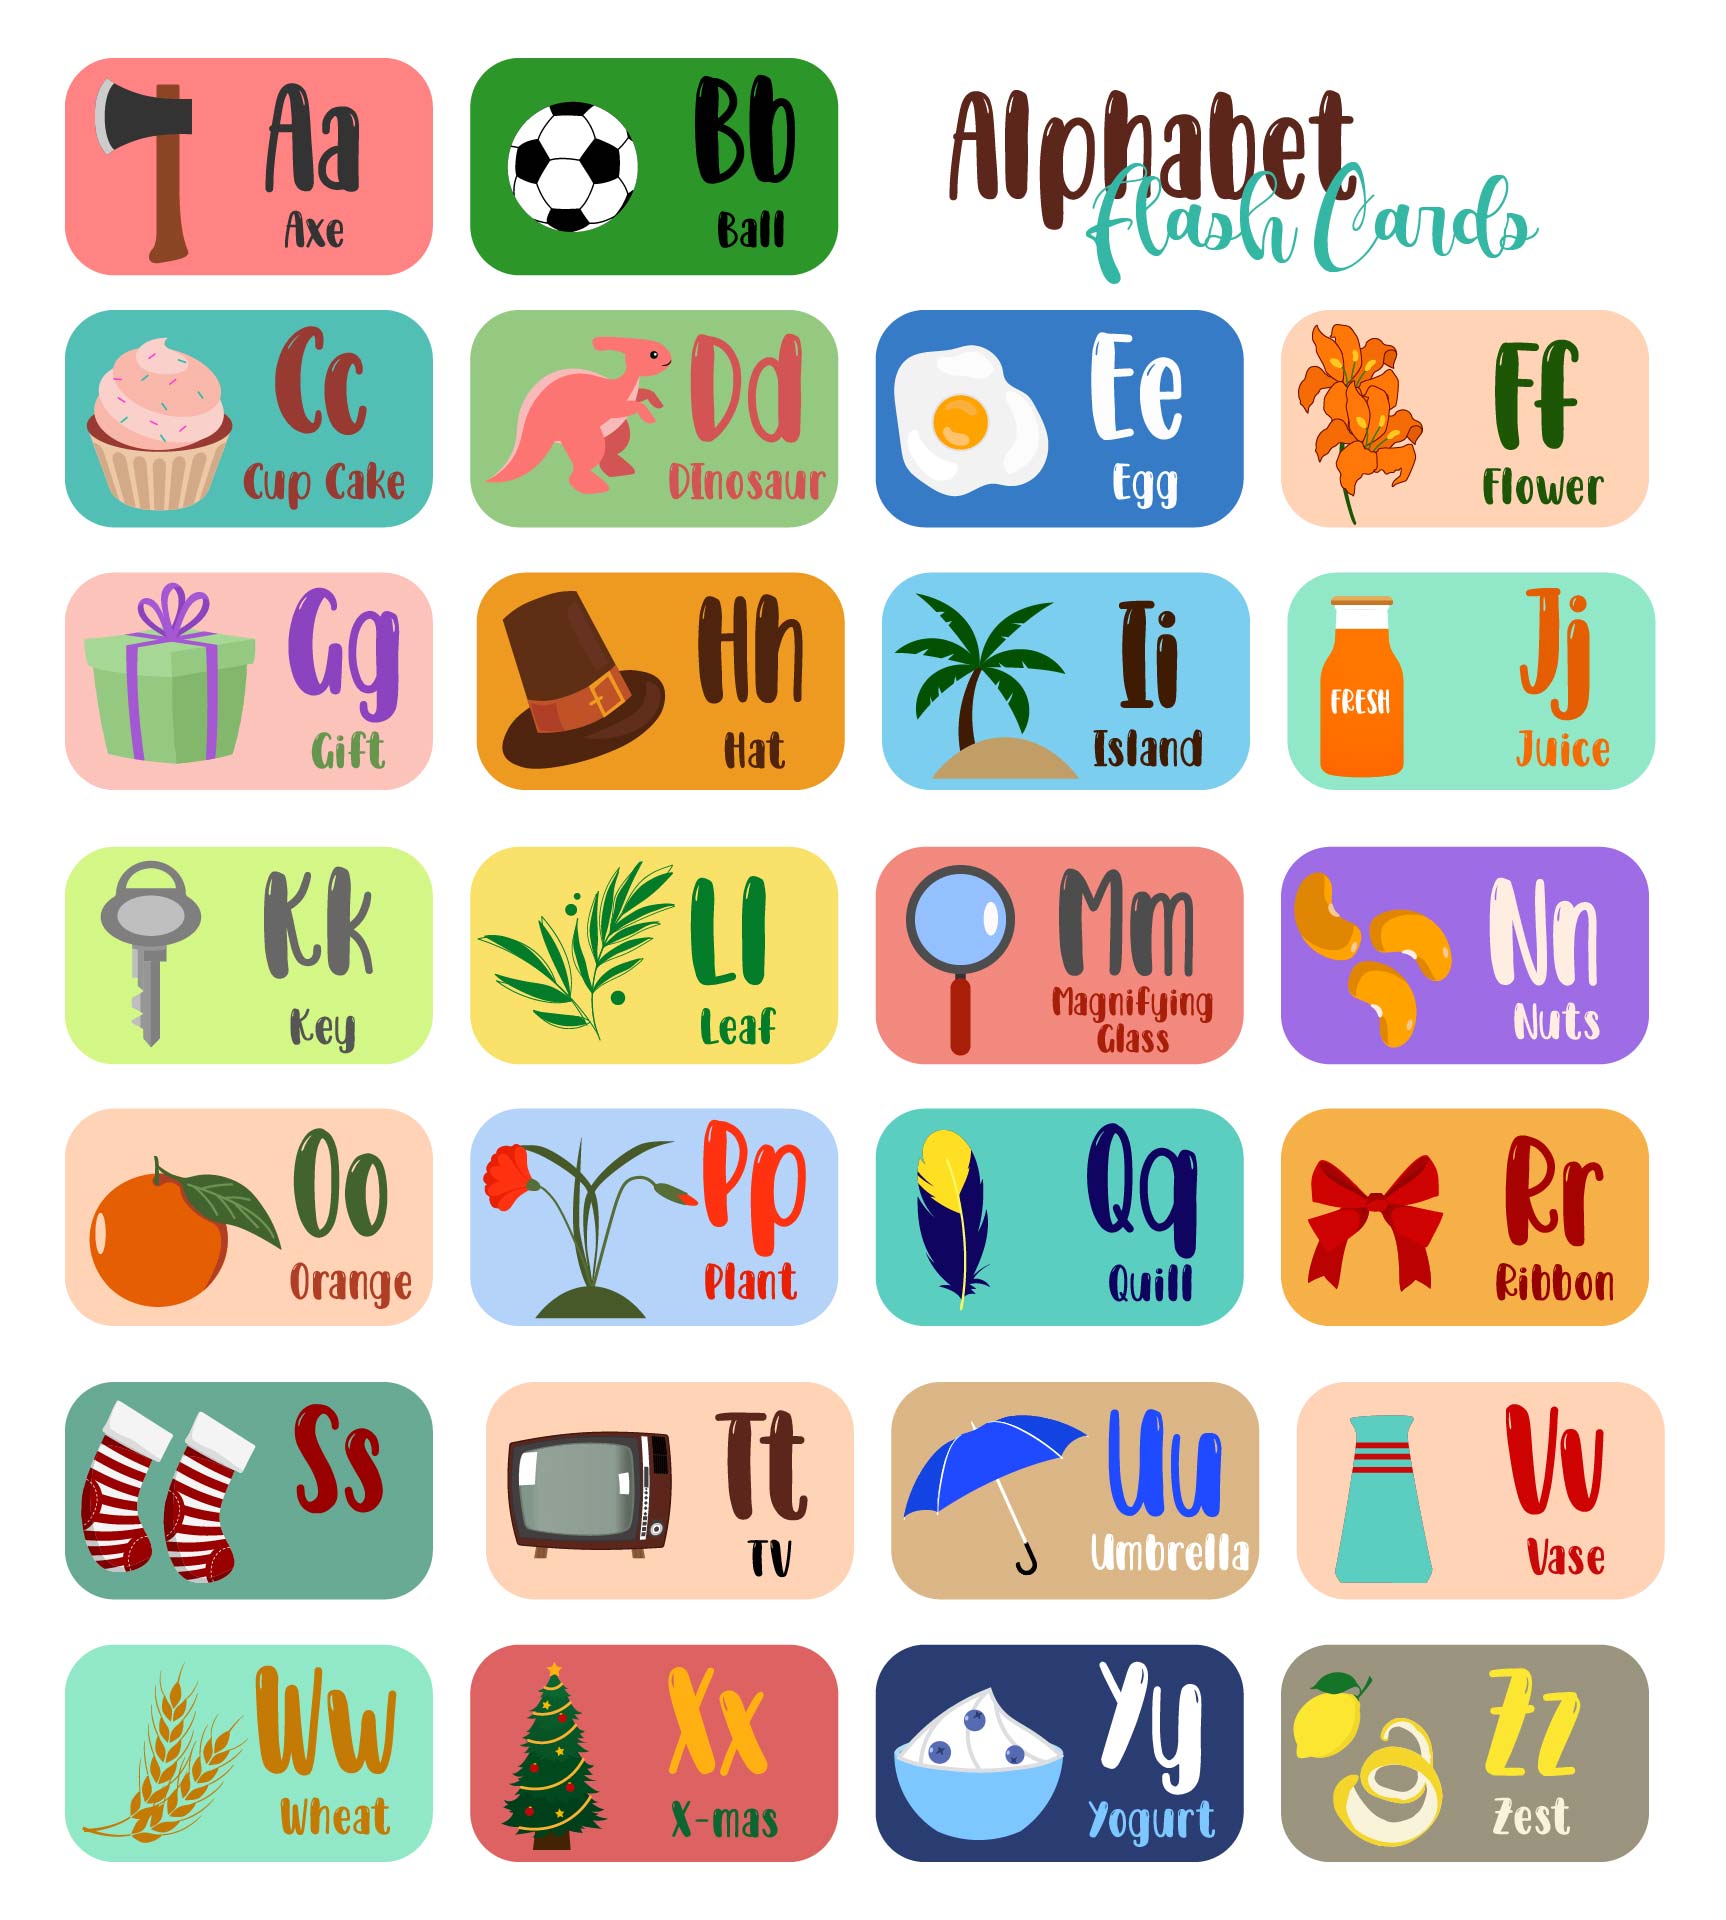 7-best-images-of-free-printable-alphabet-letter-cards-free-printable-alphabet-letters-flash